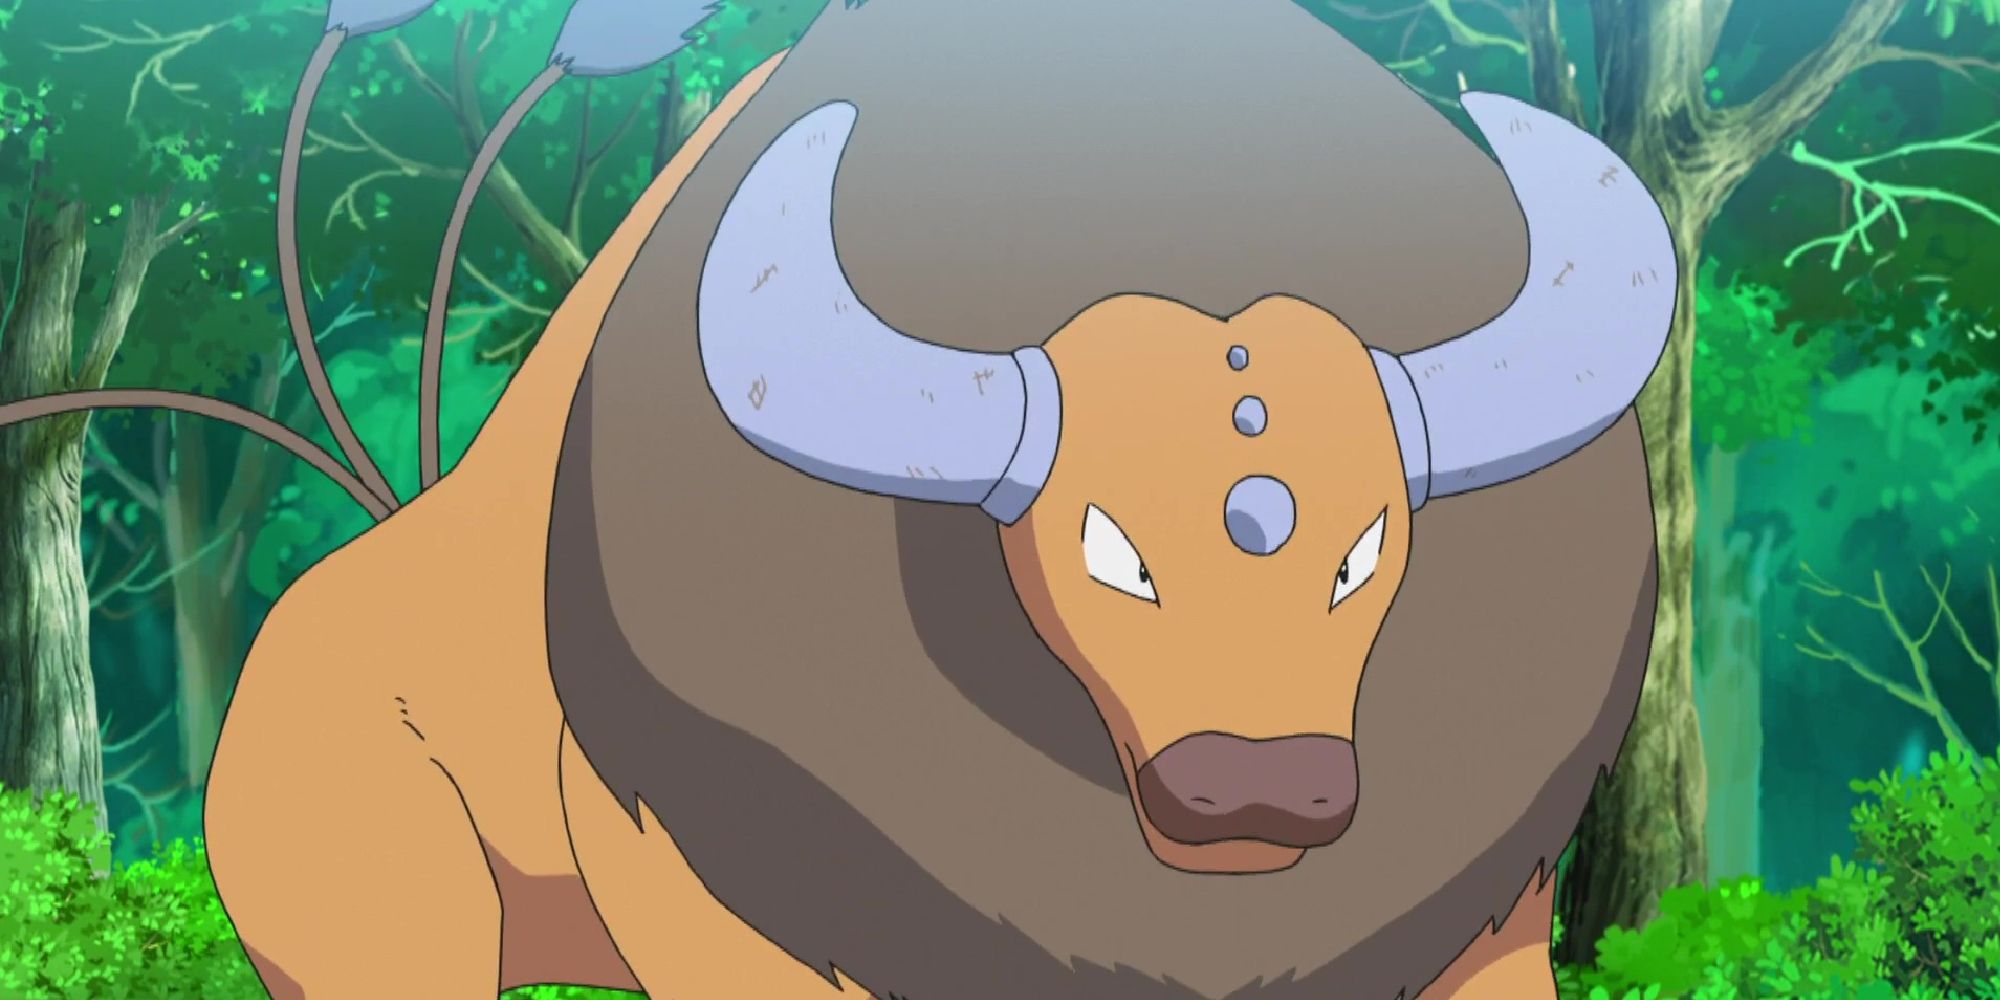 A Tauros getting ready to charge in a forest